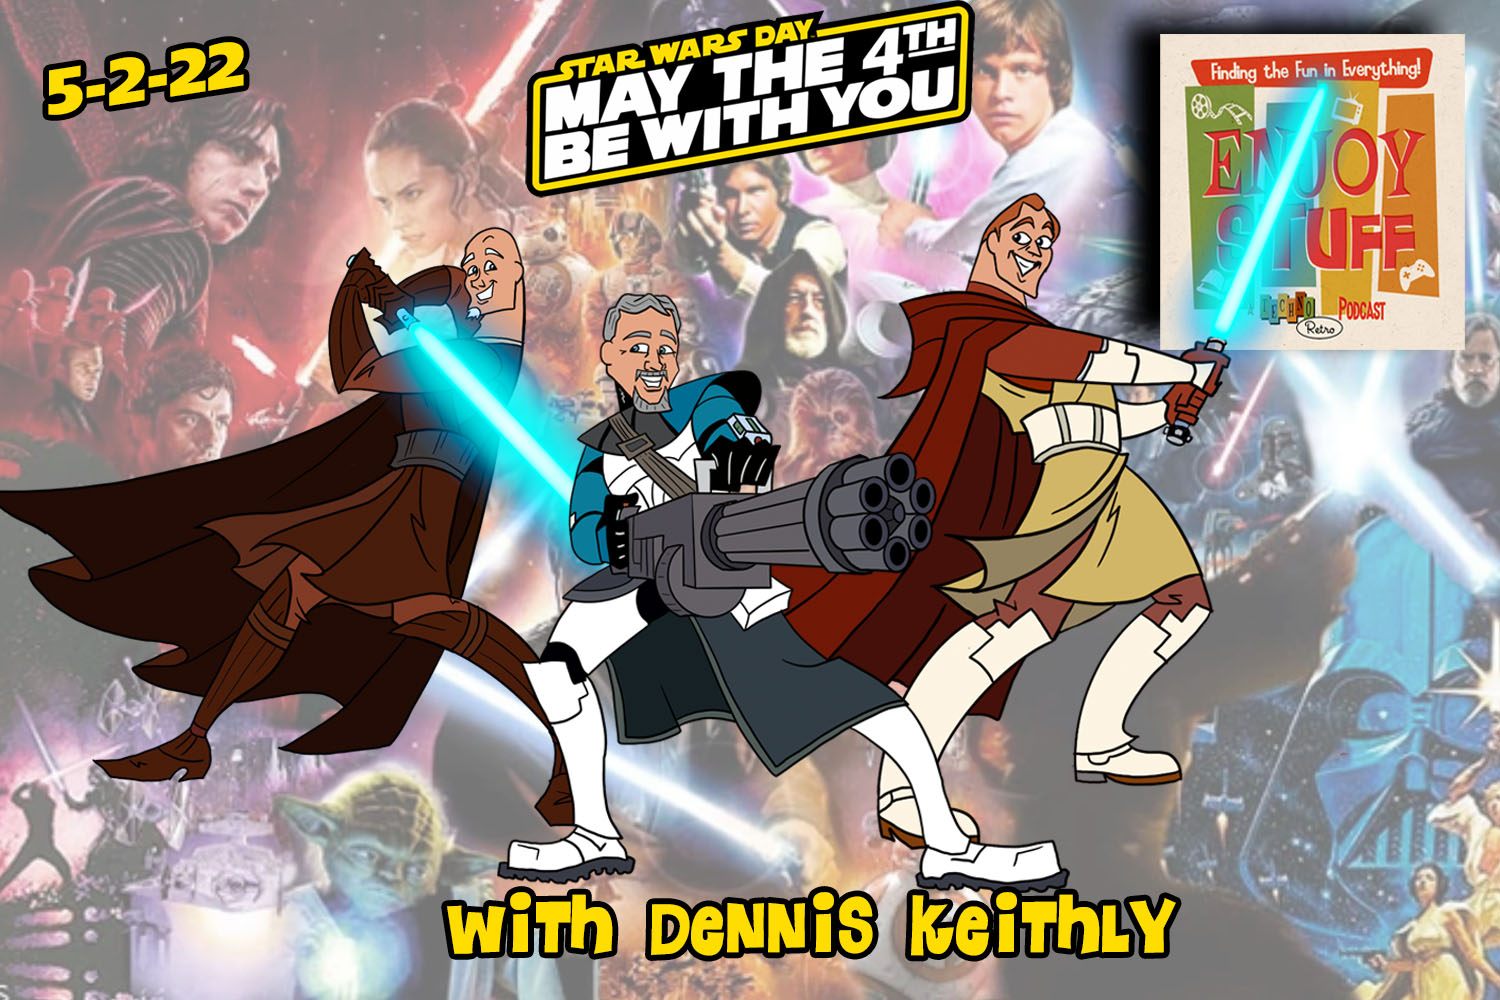 Enjoy Stuff: The Fourth is Strong with this Stuff!